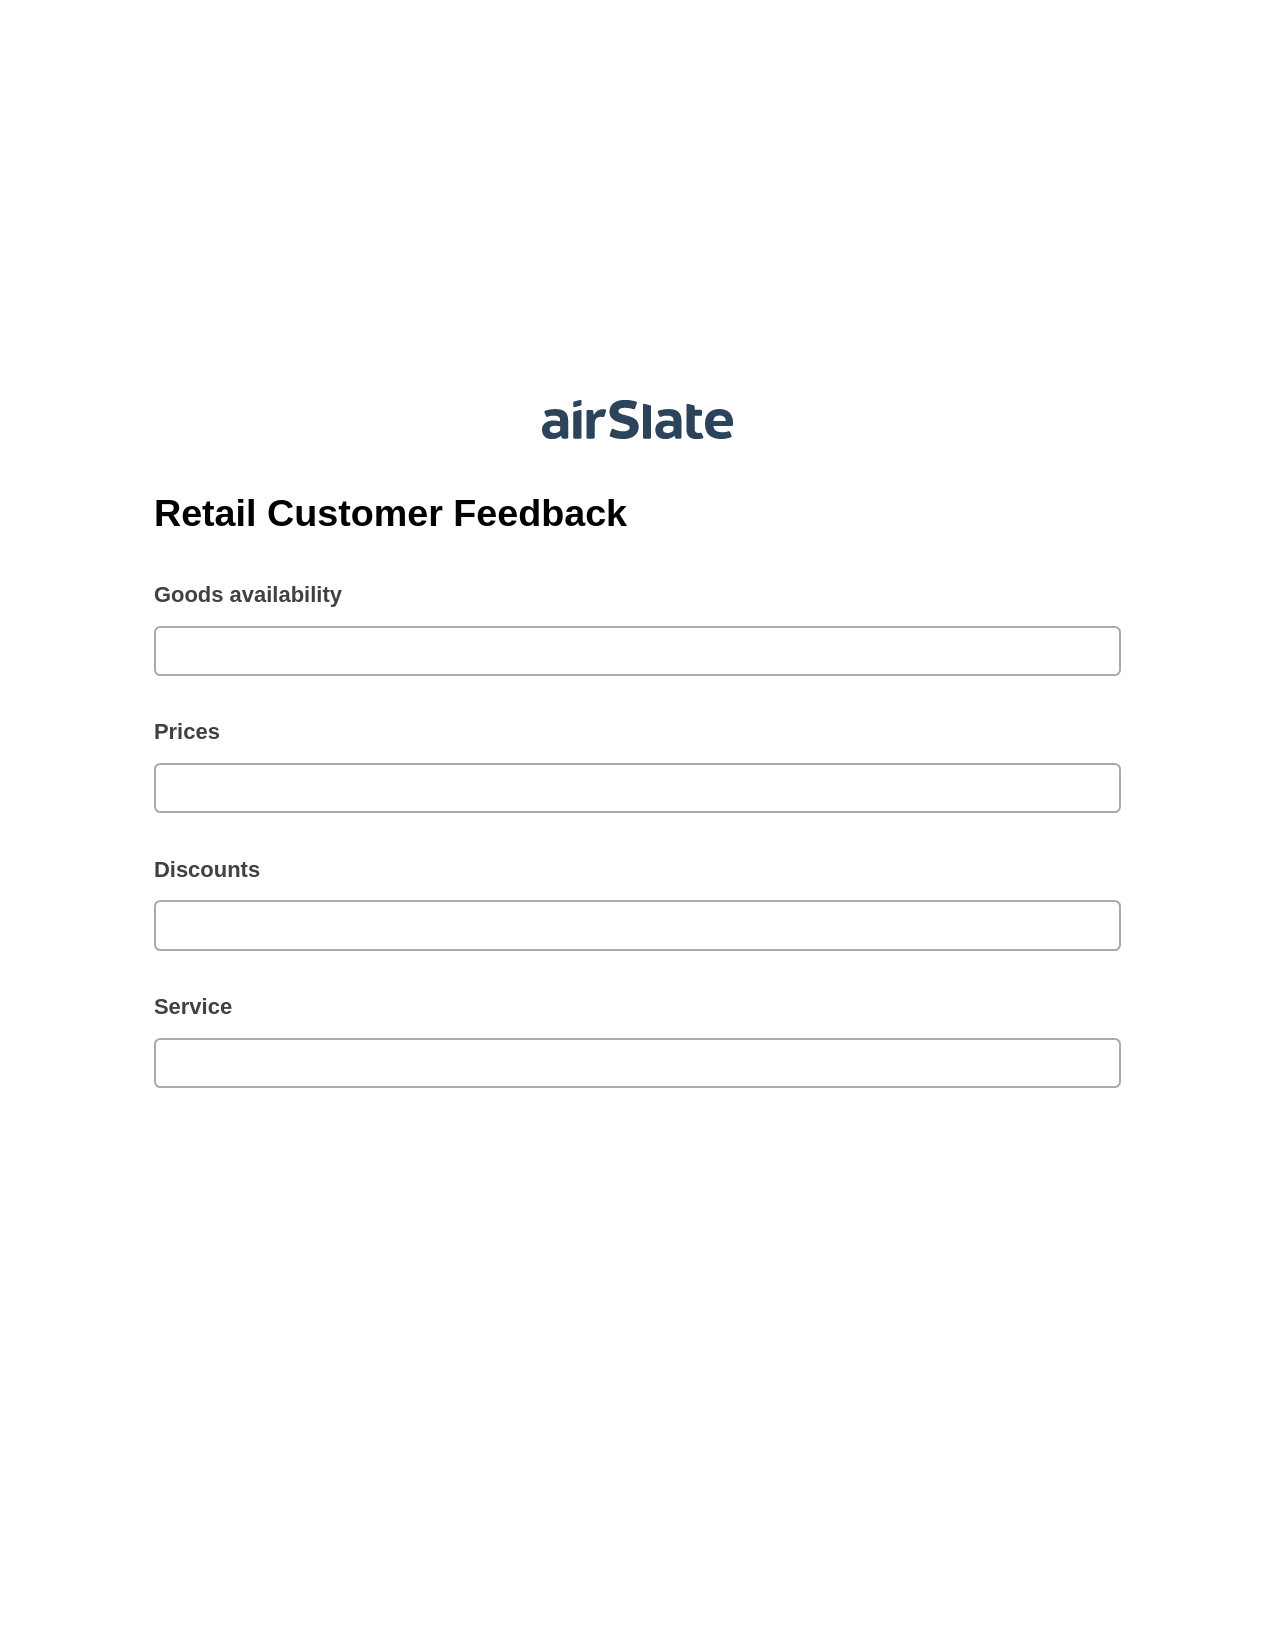 Retail Customer Feedback Pre-fill from Salesforce Records with SOQL Bot, Document Hide Bot, Export to Excel 365 Bot